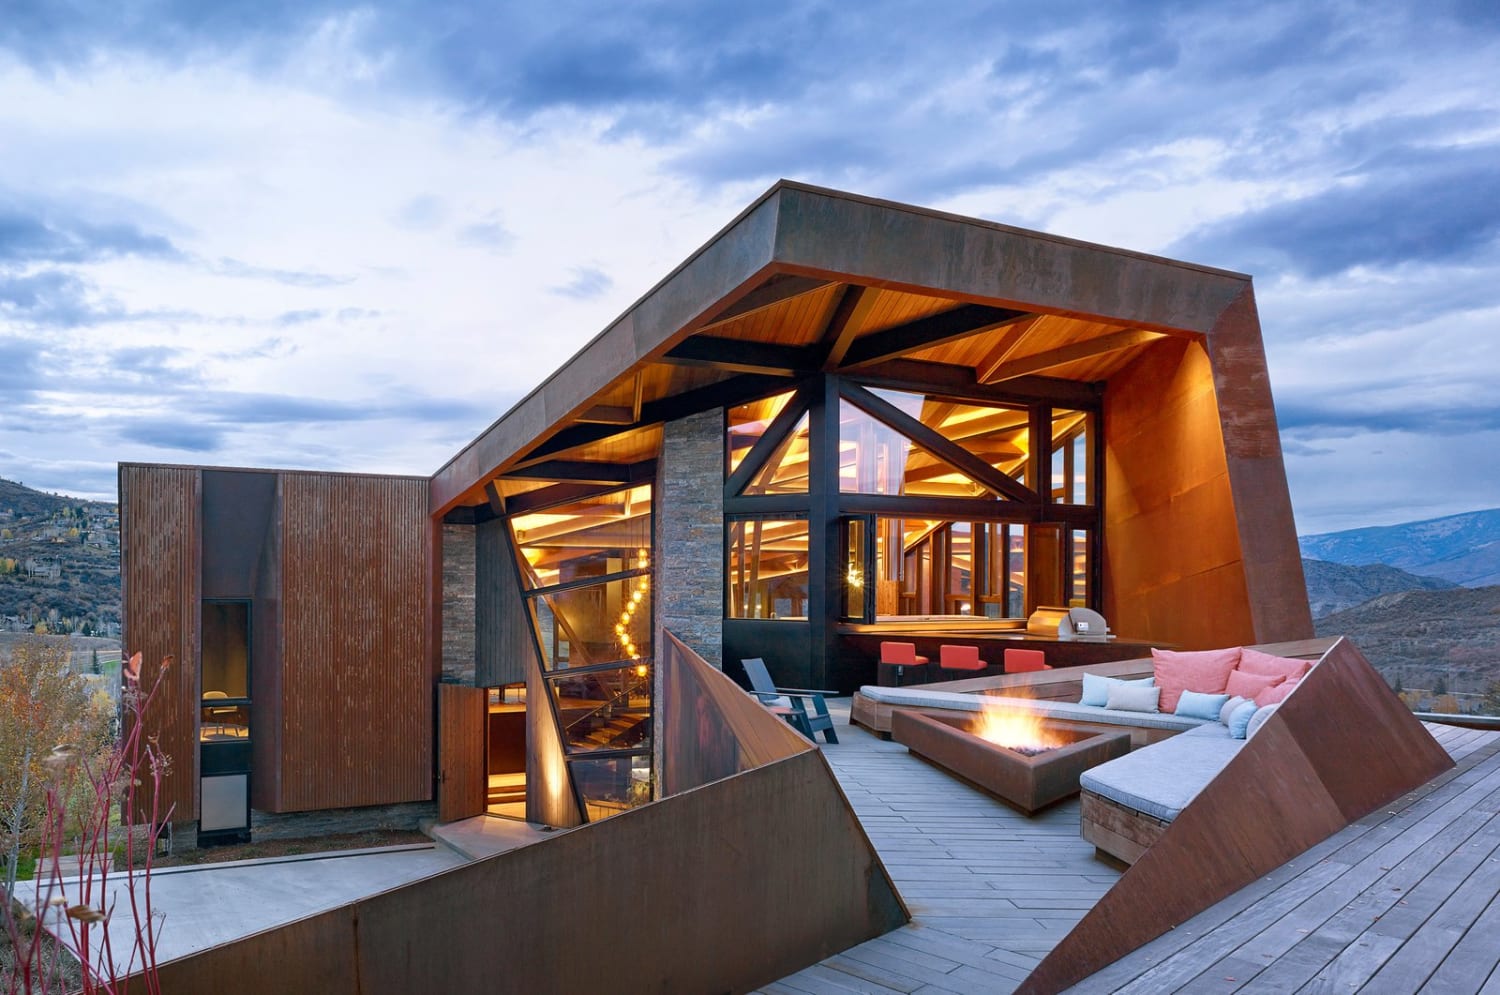 Spectacular views from a Mountain Cabin in Colorado by Skylab Architecture